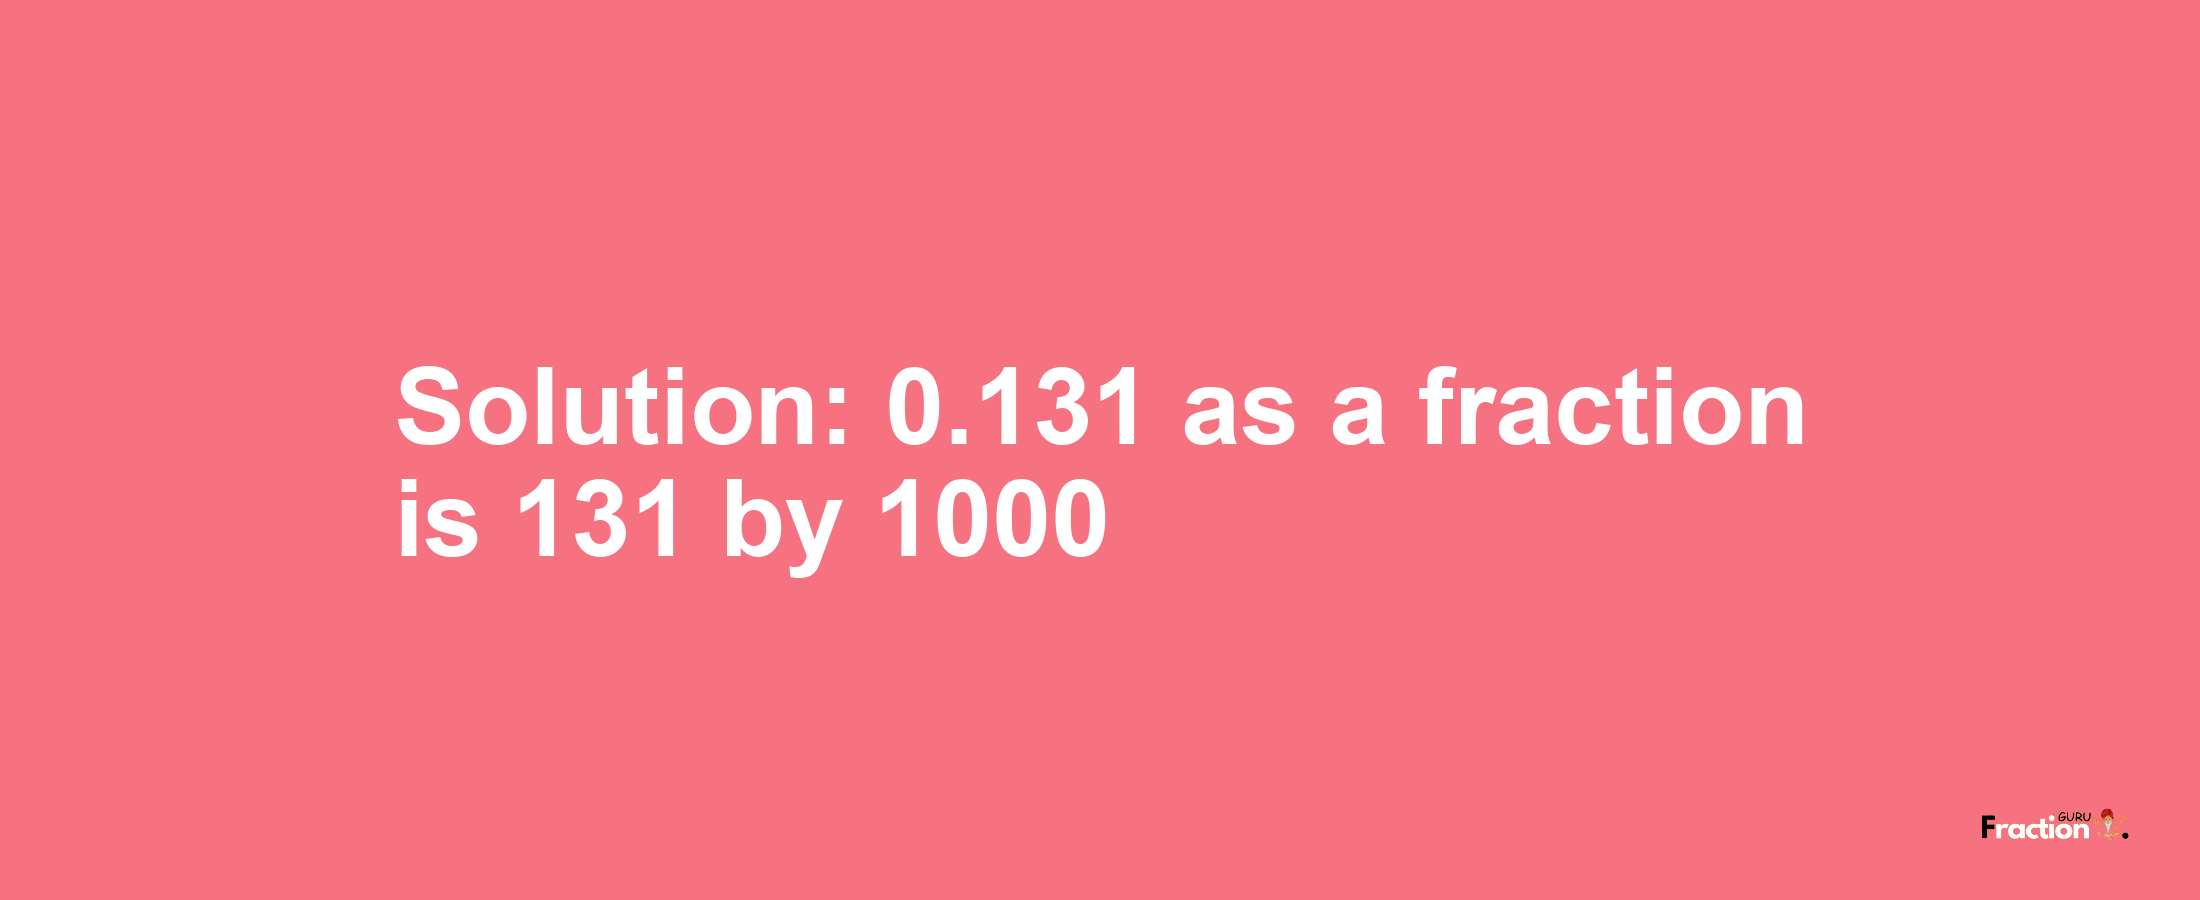 Solution:0.131 as a fraction is 131/1000